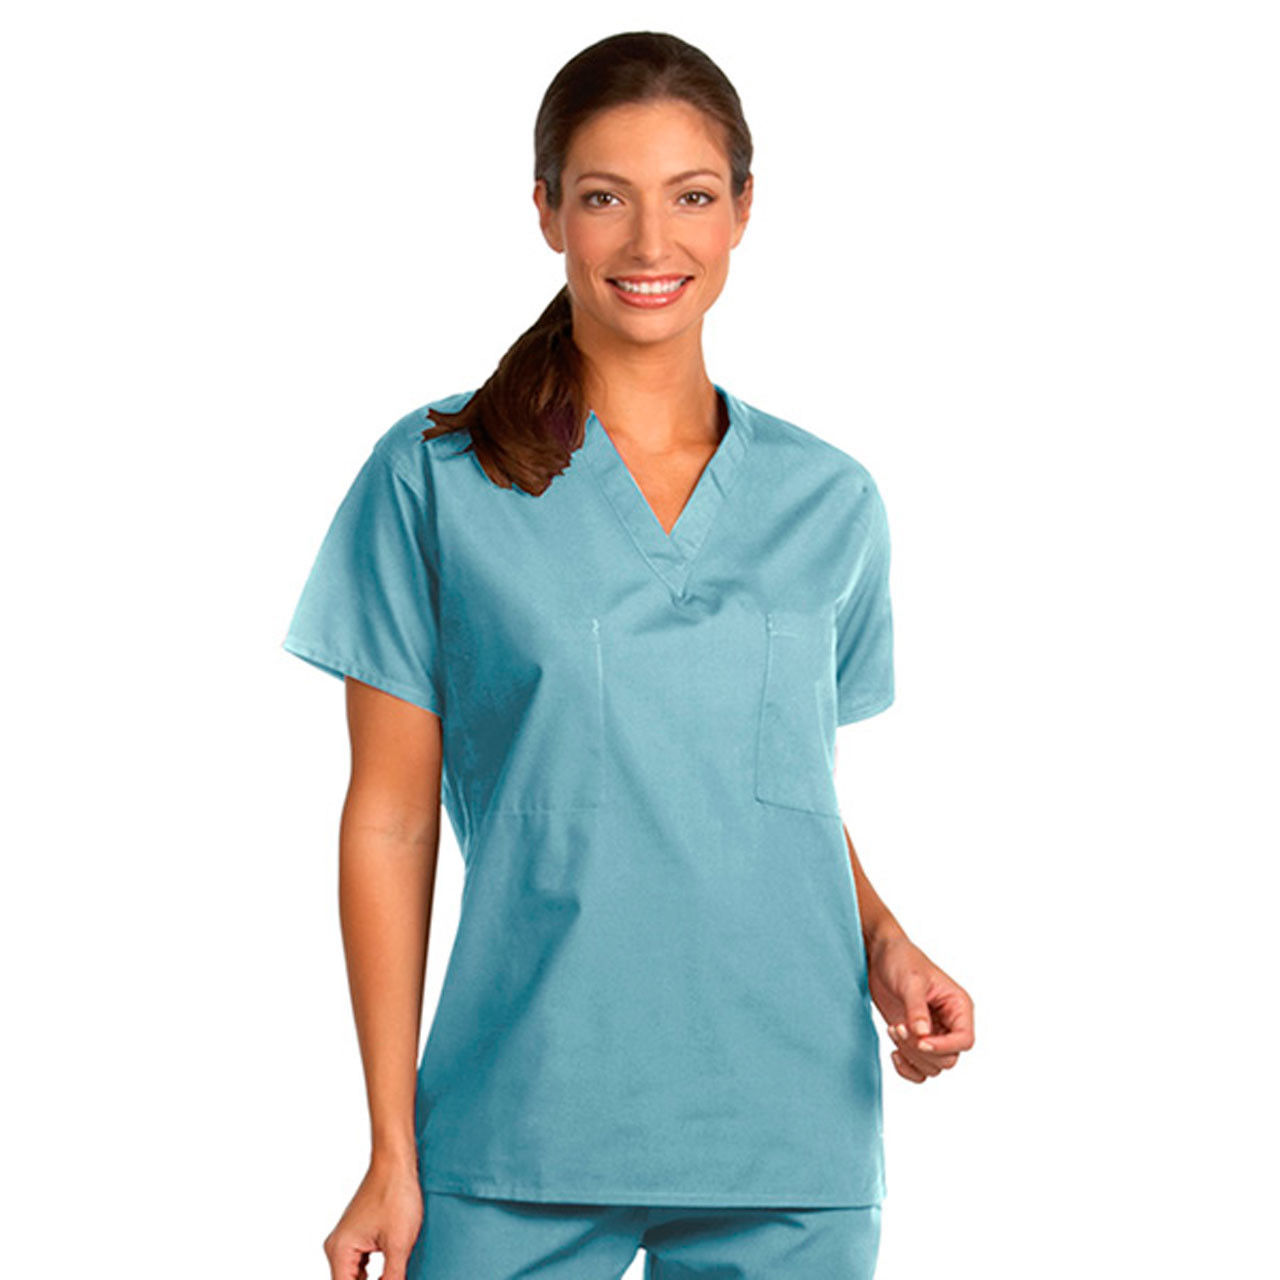 What is the durability level of these Unisex Surgical Scrubs in Misty Green?